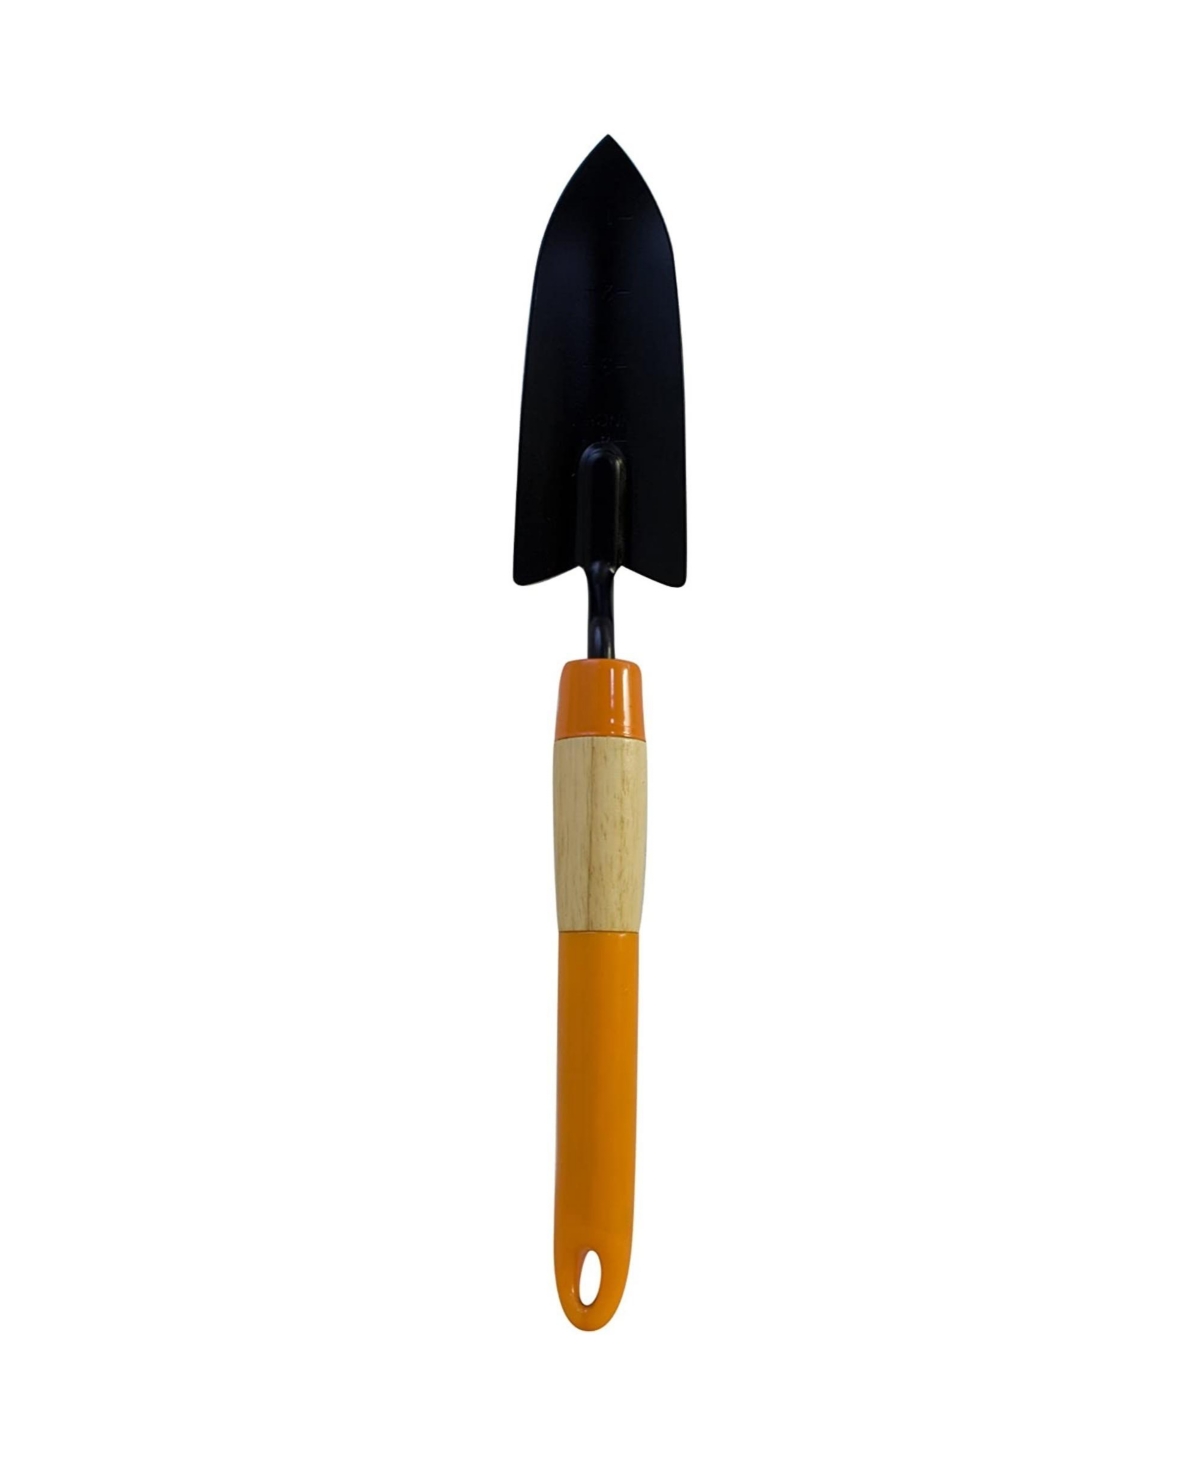 Hand Transplanter with Black Powder-Coated Head and Comfort Handle - Multi